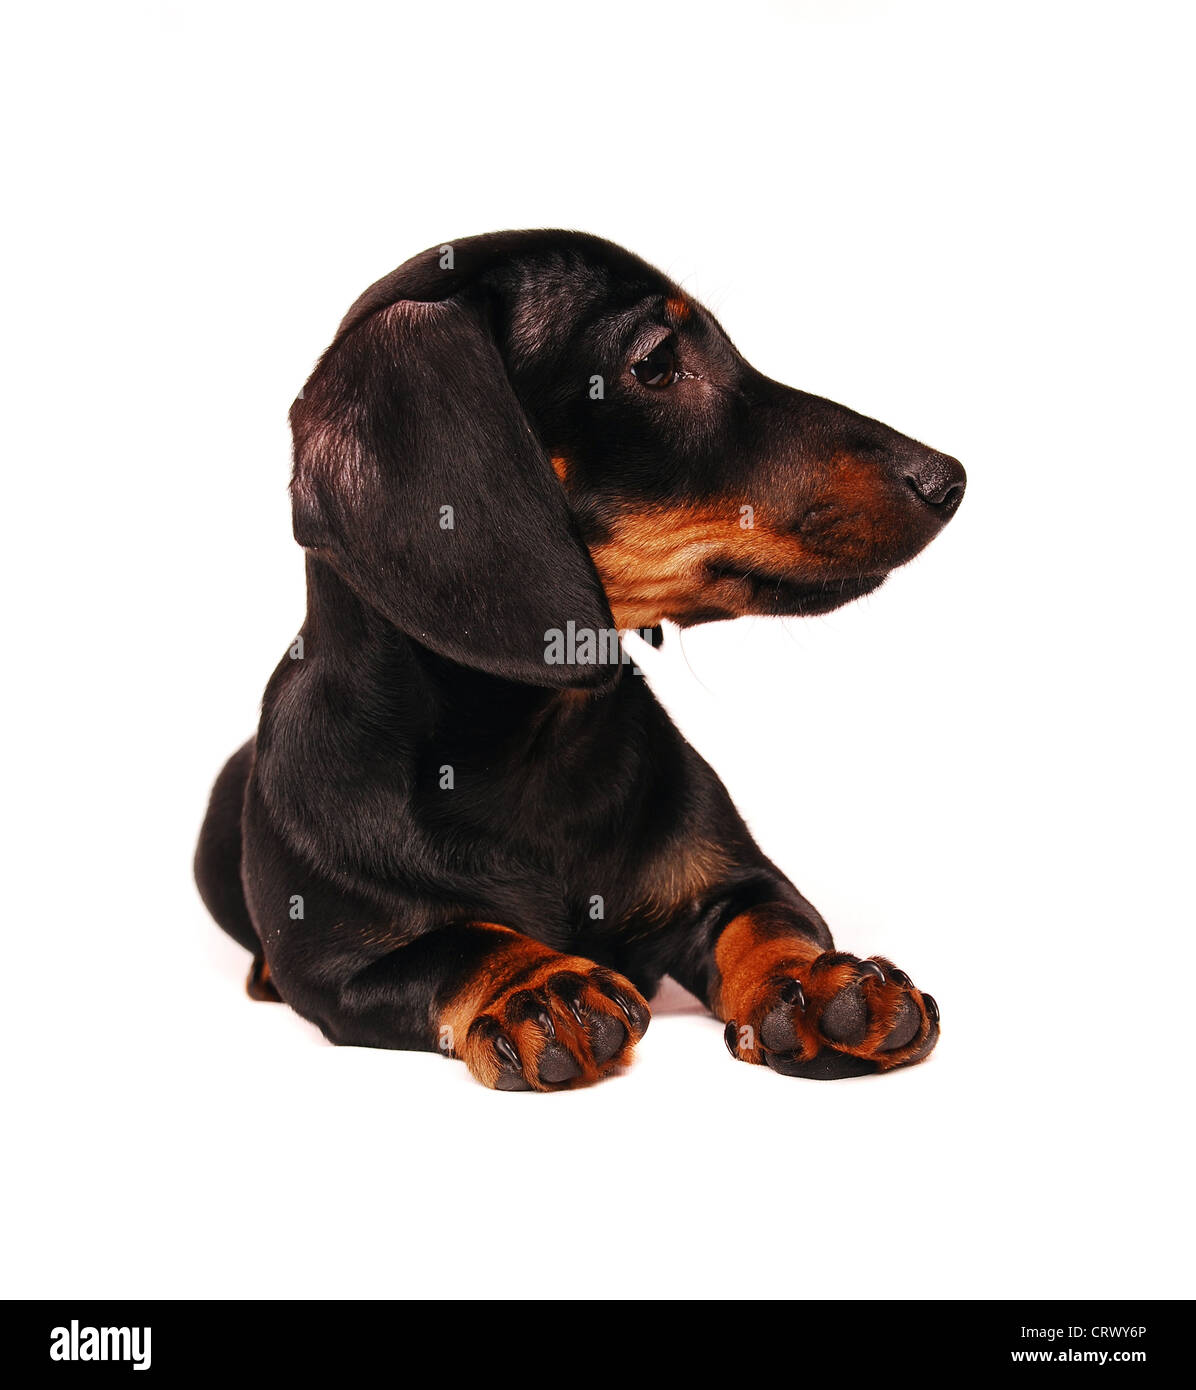 59 Top Photos Dachshund Puppies Vancouver Bc / Holy Miniature Dachshund Puppies Asking 700 00 The Buy And Sell Community